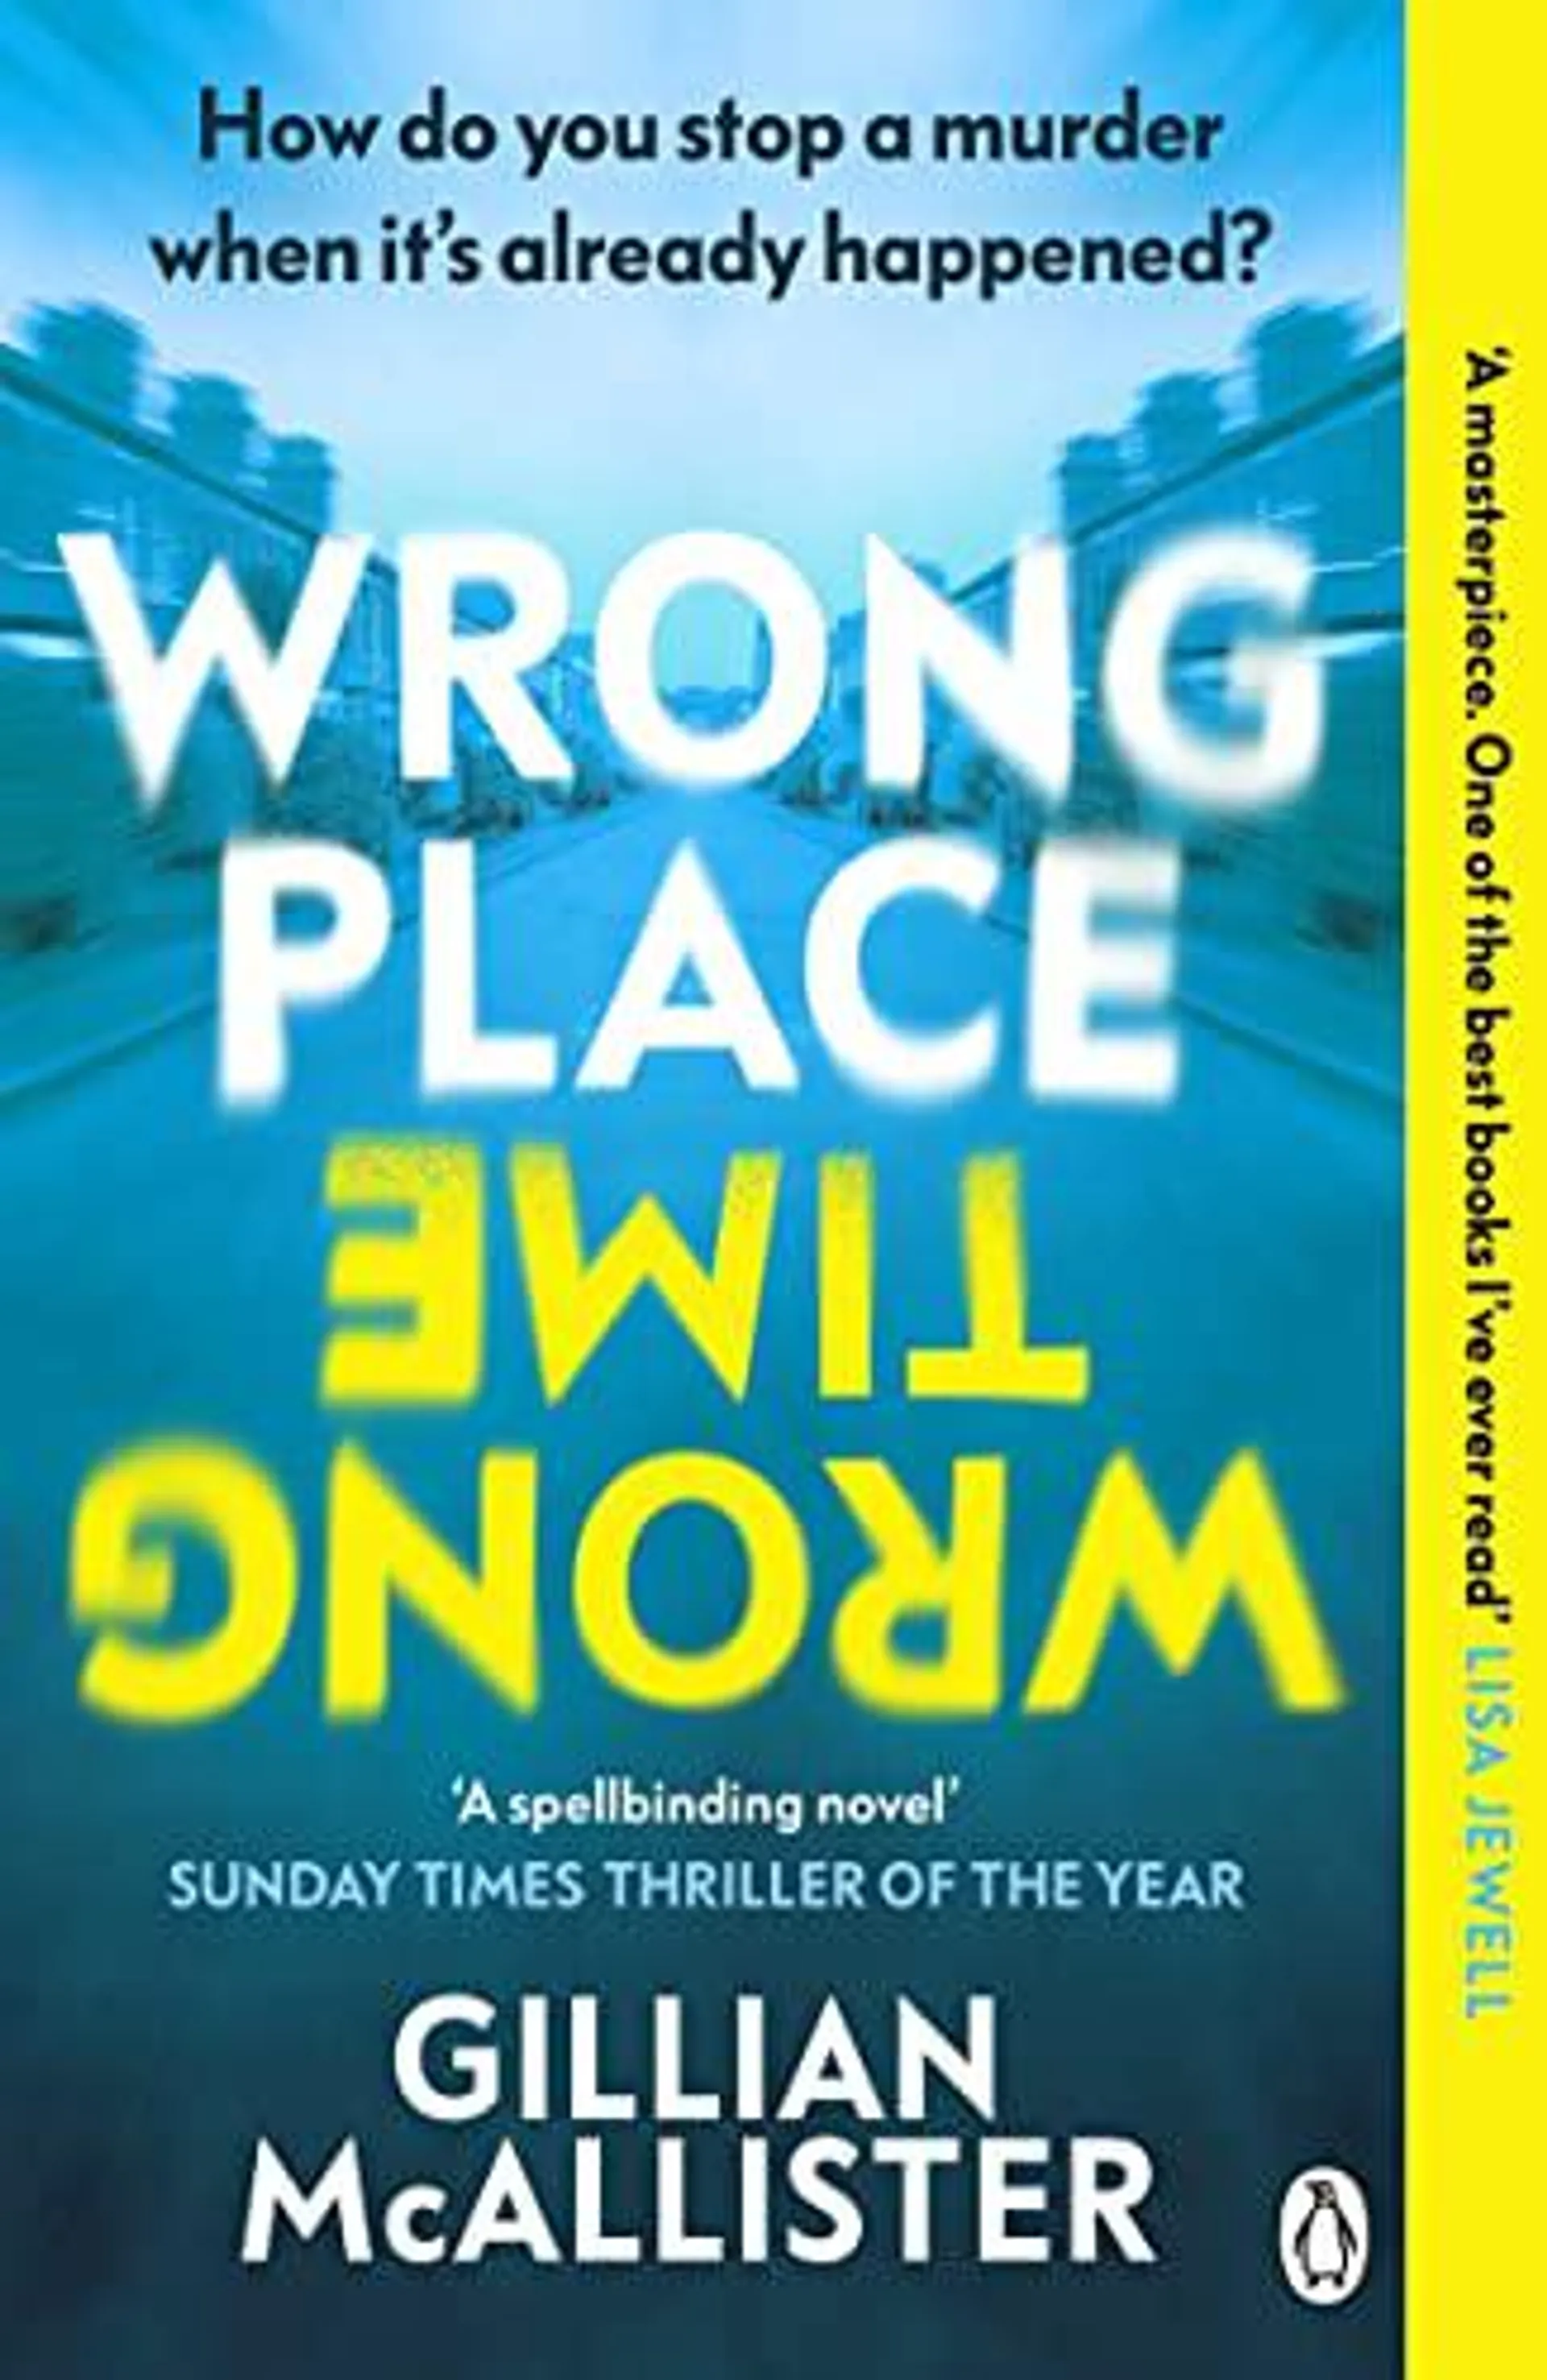 Wrong Place Wrong Time by Gillian McAllister